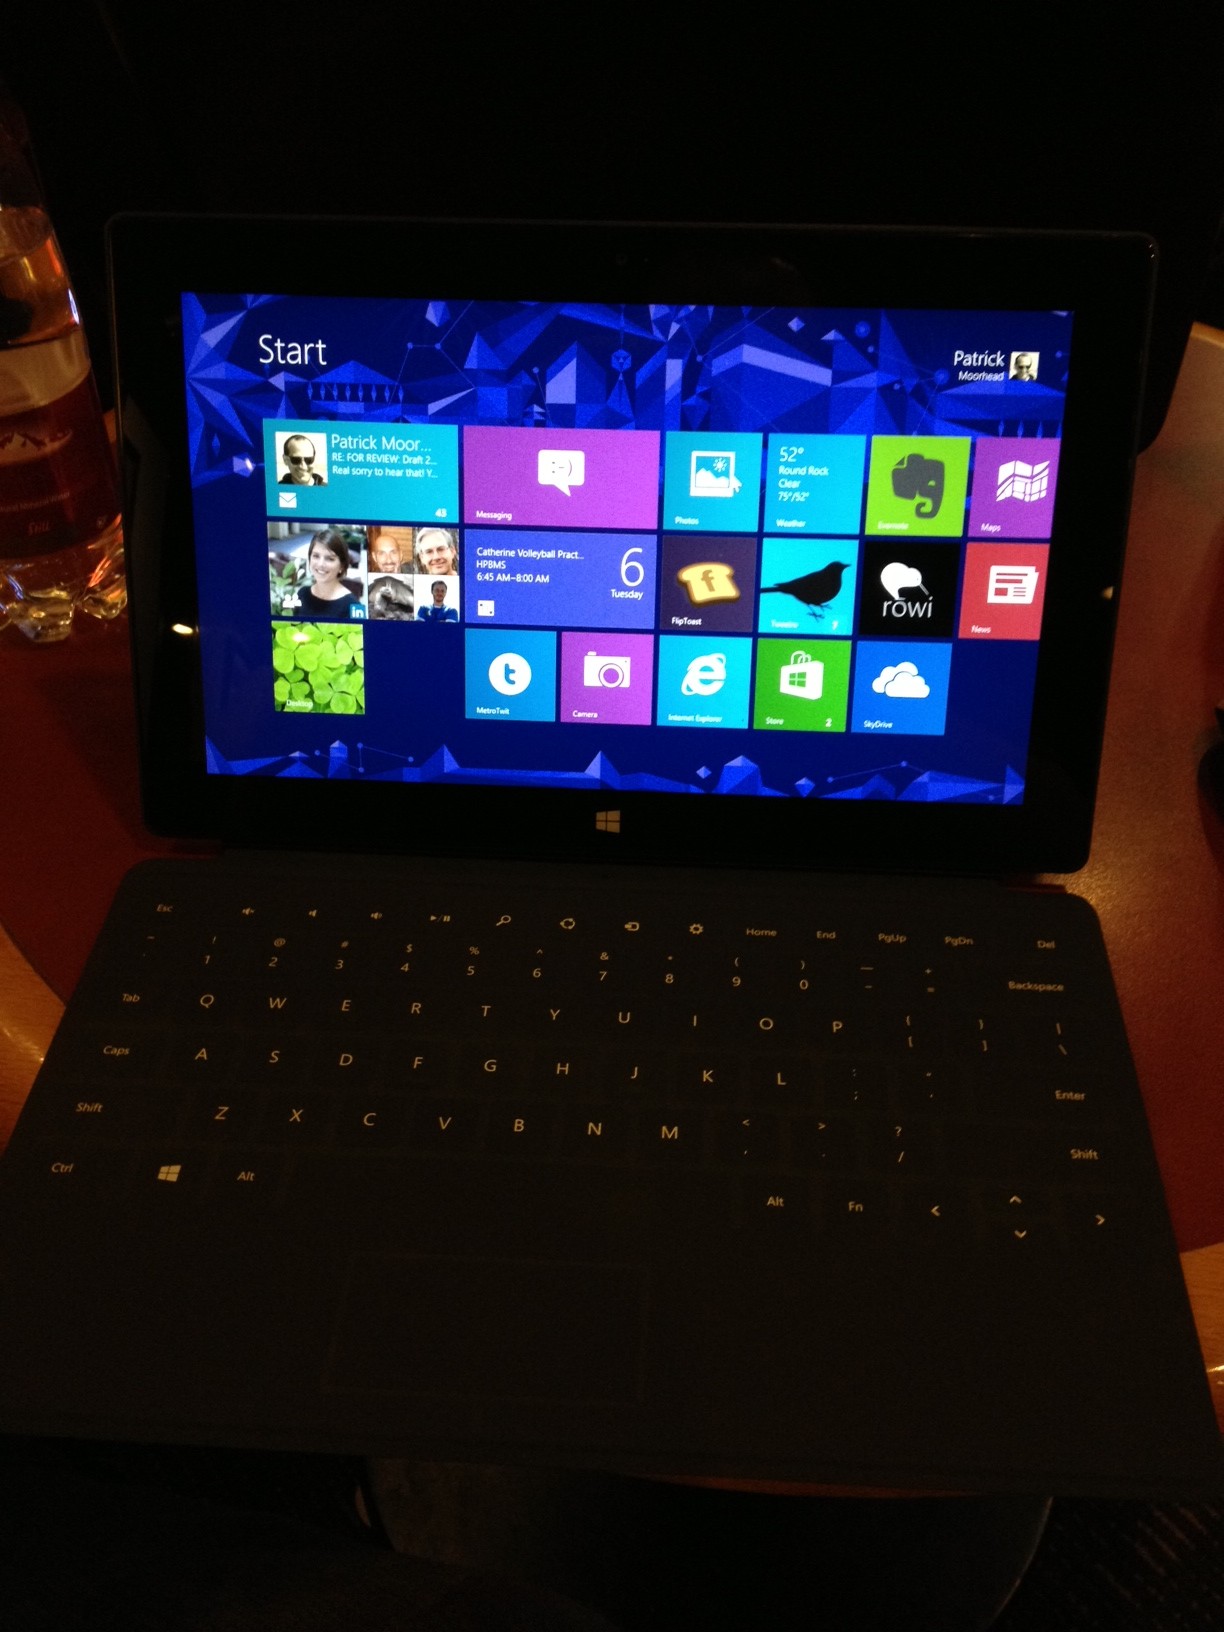 Ten Things I prefer to do on Microsoft Surface versus my Apple iPad